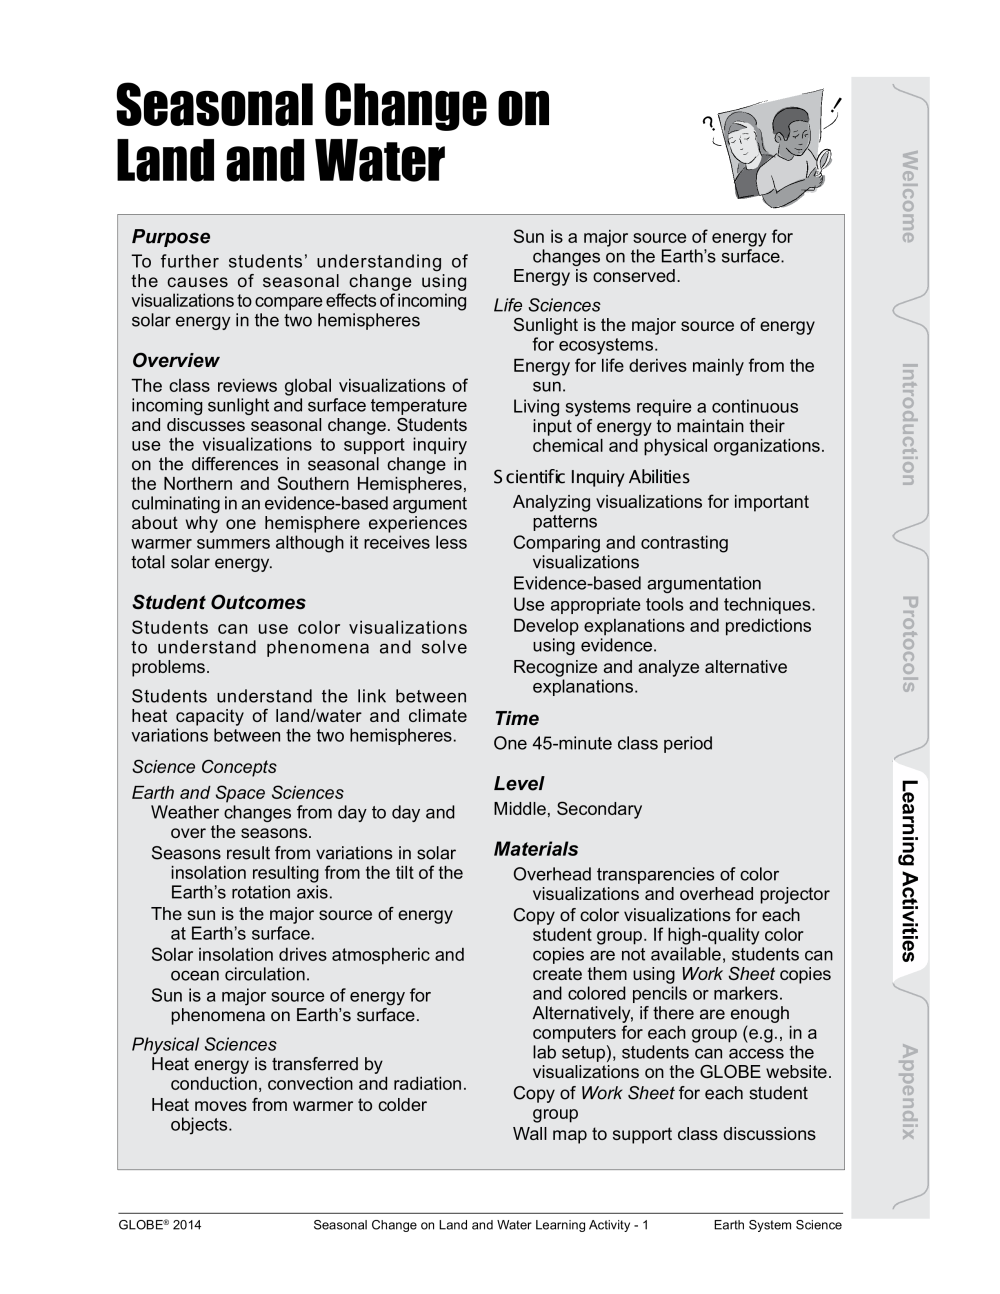 Learning Activities preview for S5- Seasonal Change on Land and Water